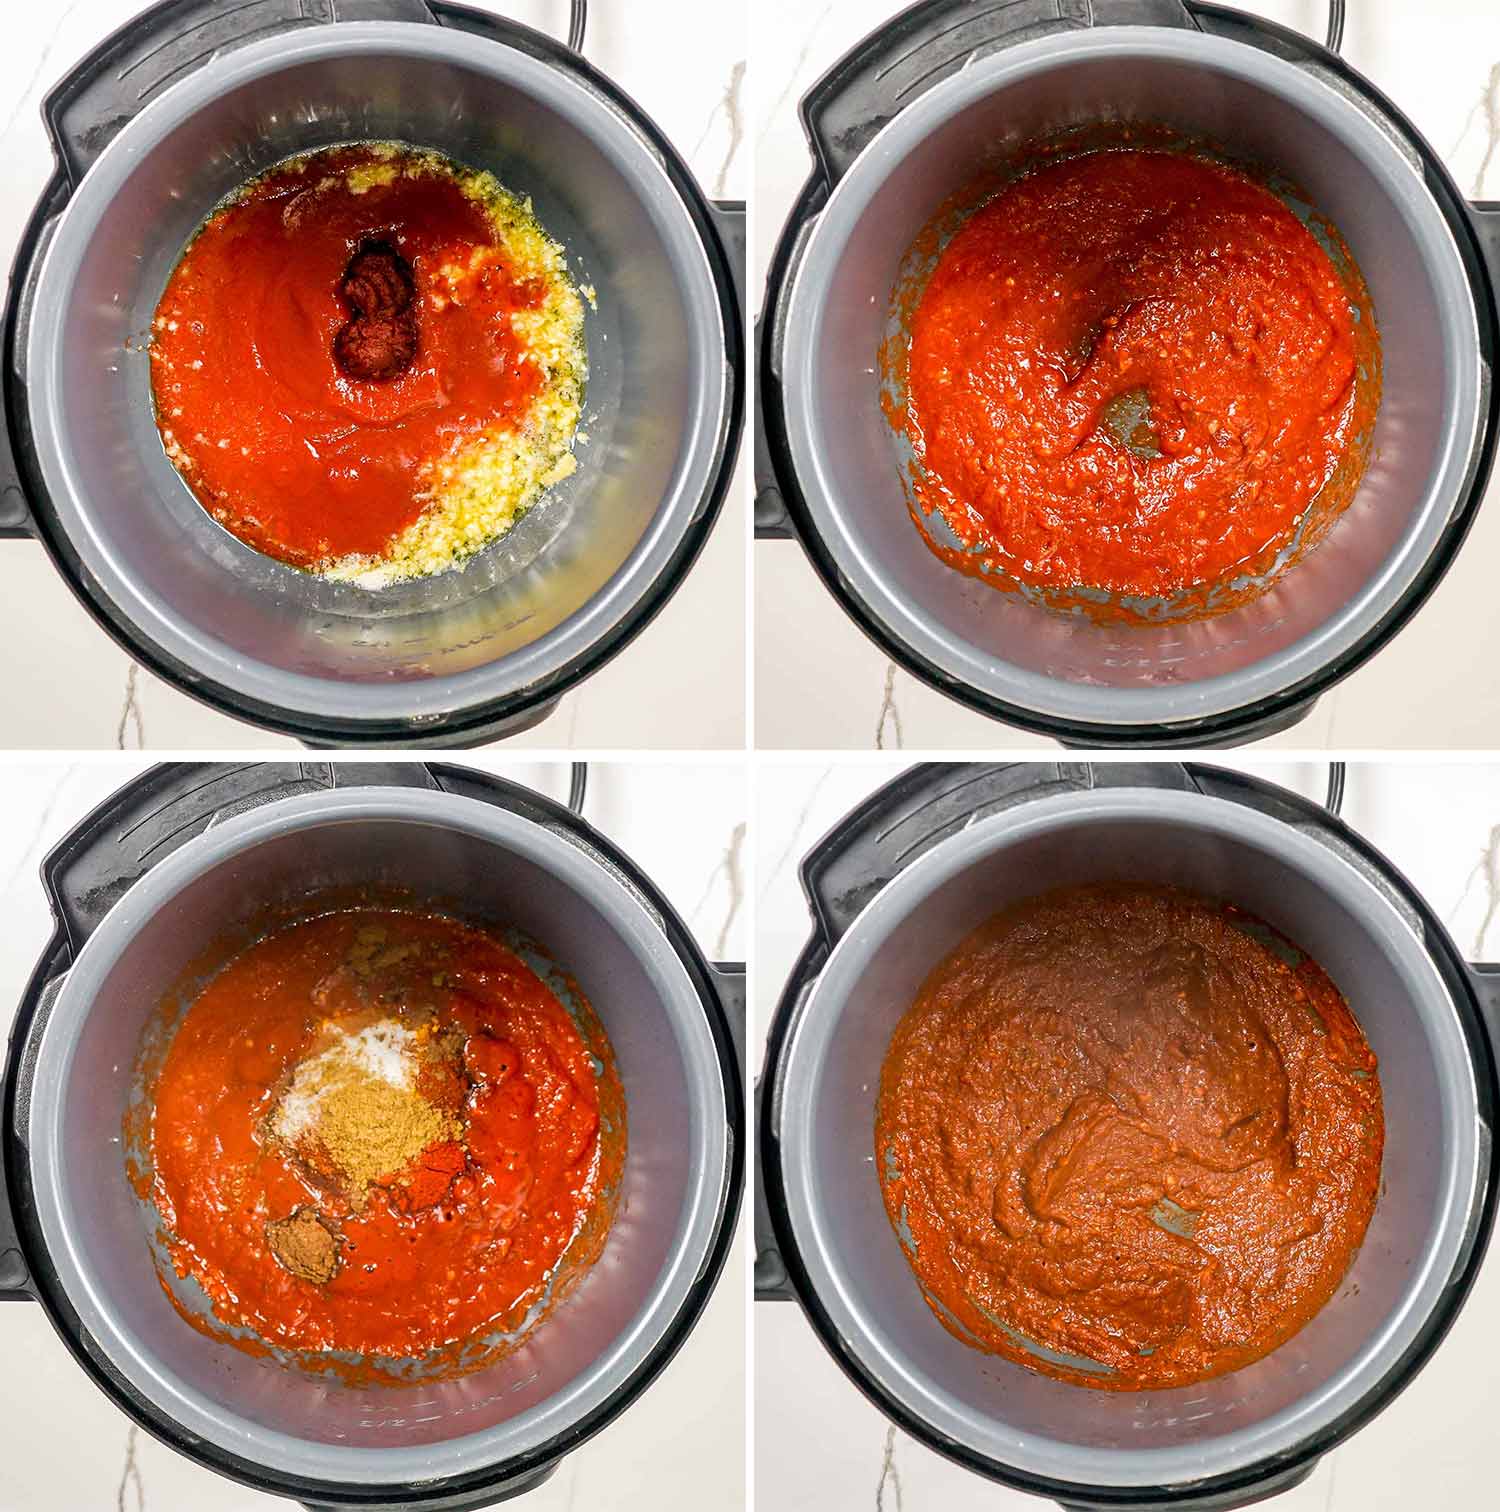 process shots showing how to make butter chicken in the instant pot.